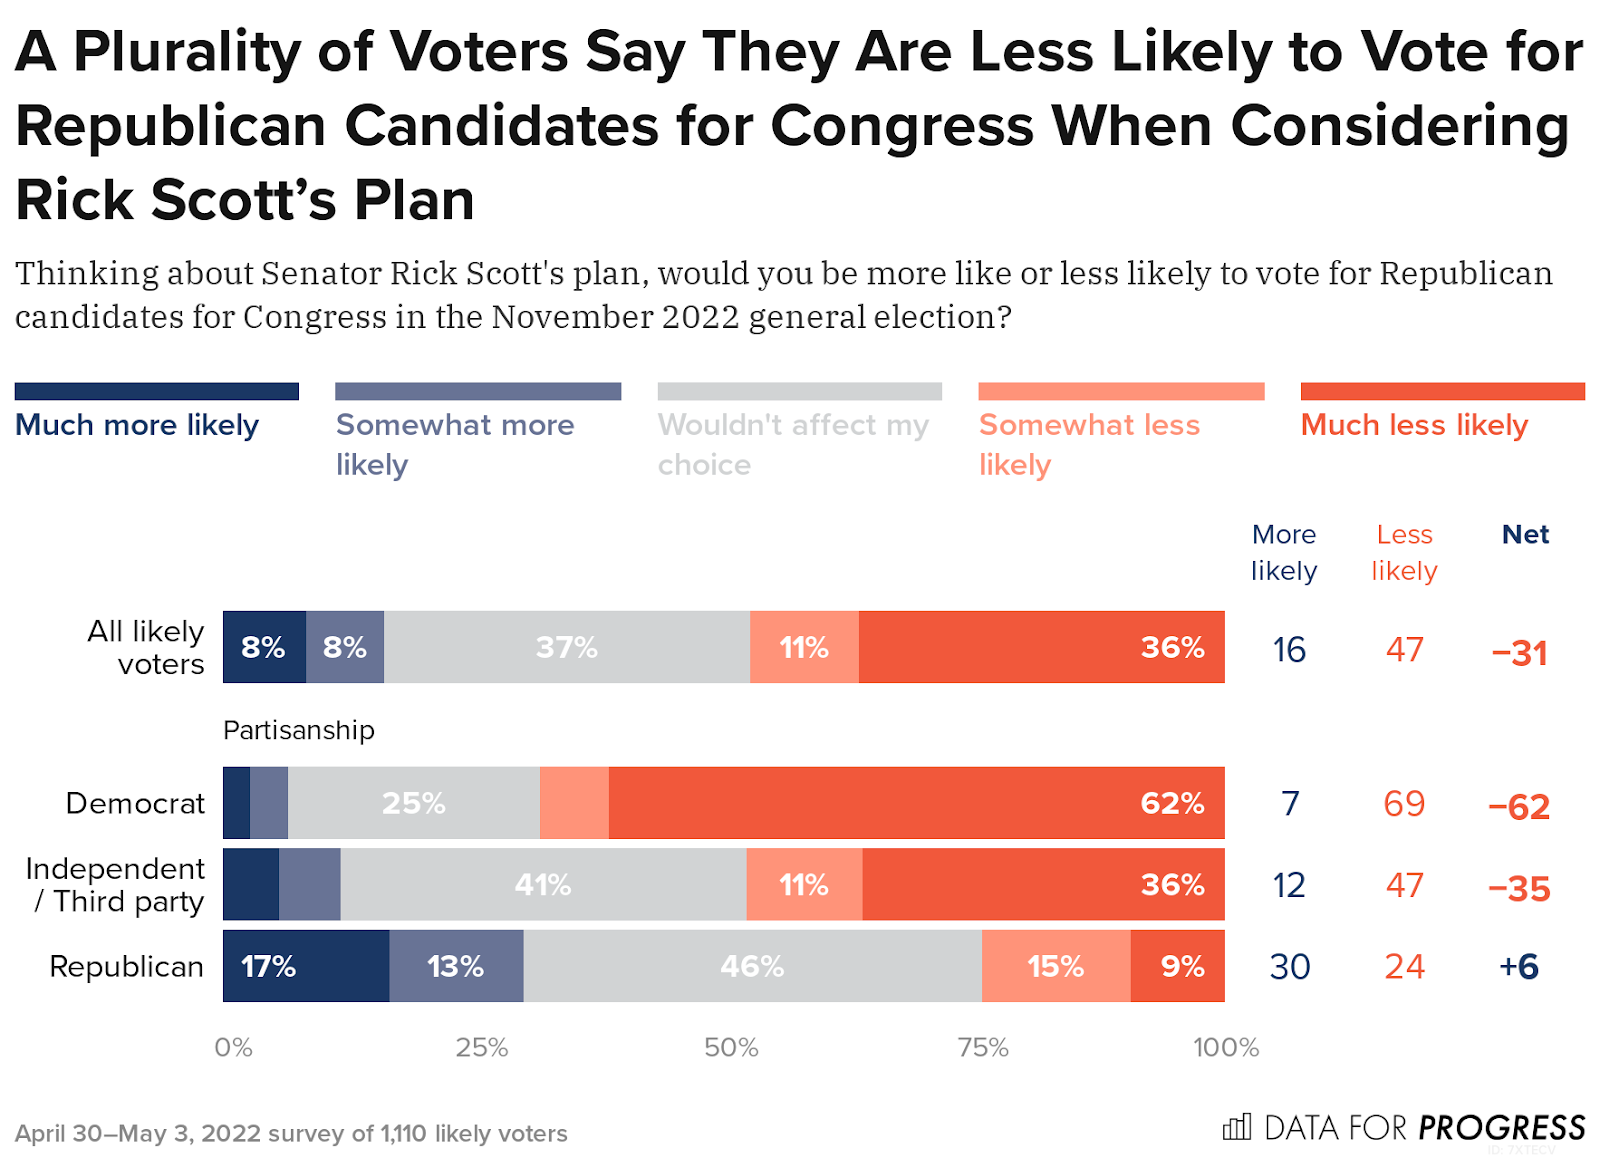 EXCLUSIVE POLL: A Plan That Would Raise Taxes and Could End Social Security and Medicare—is Massively Unpopular